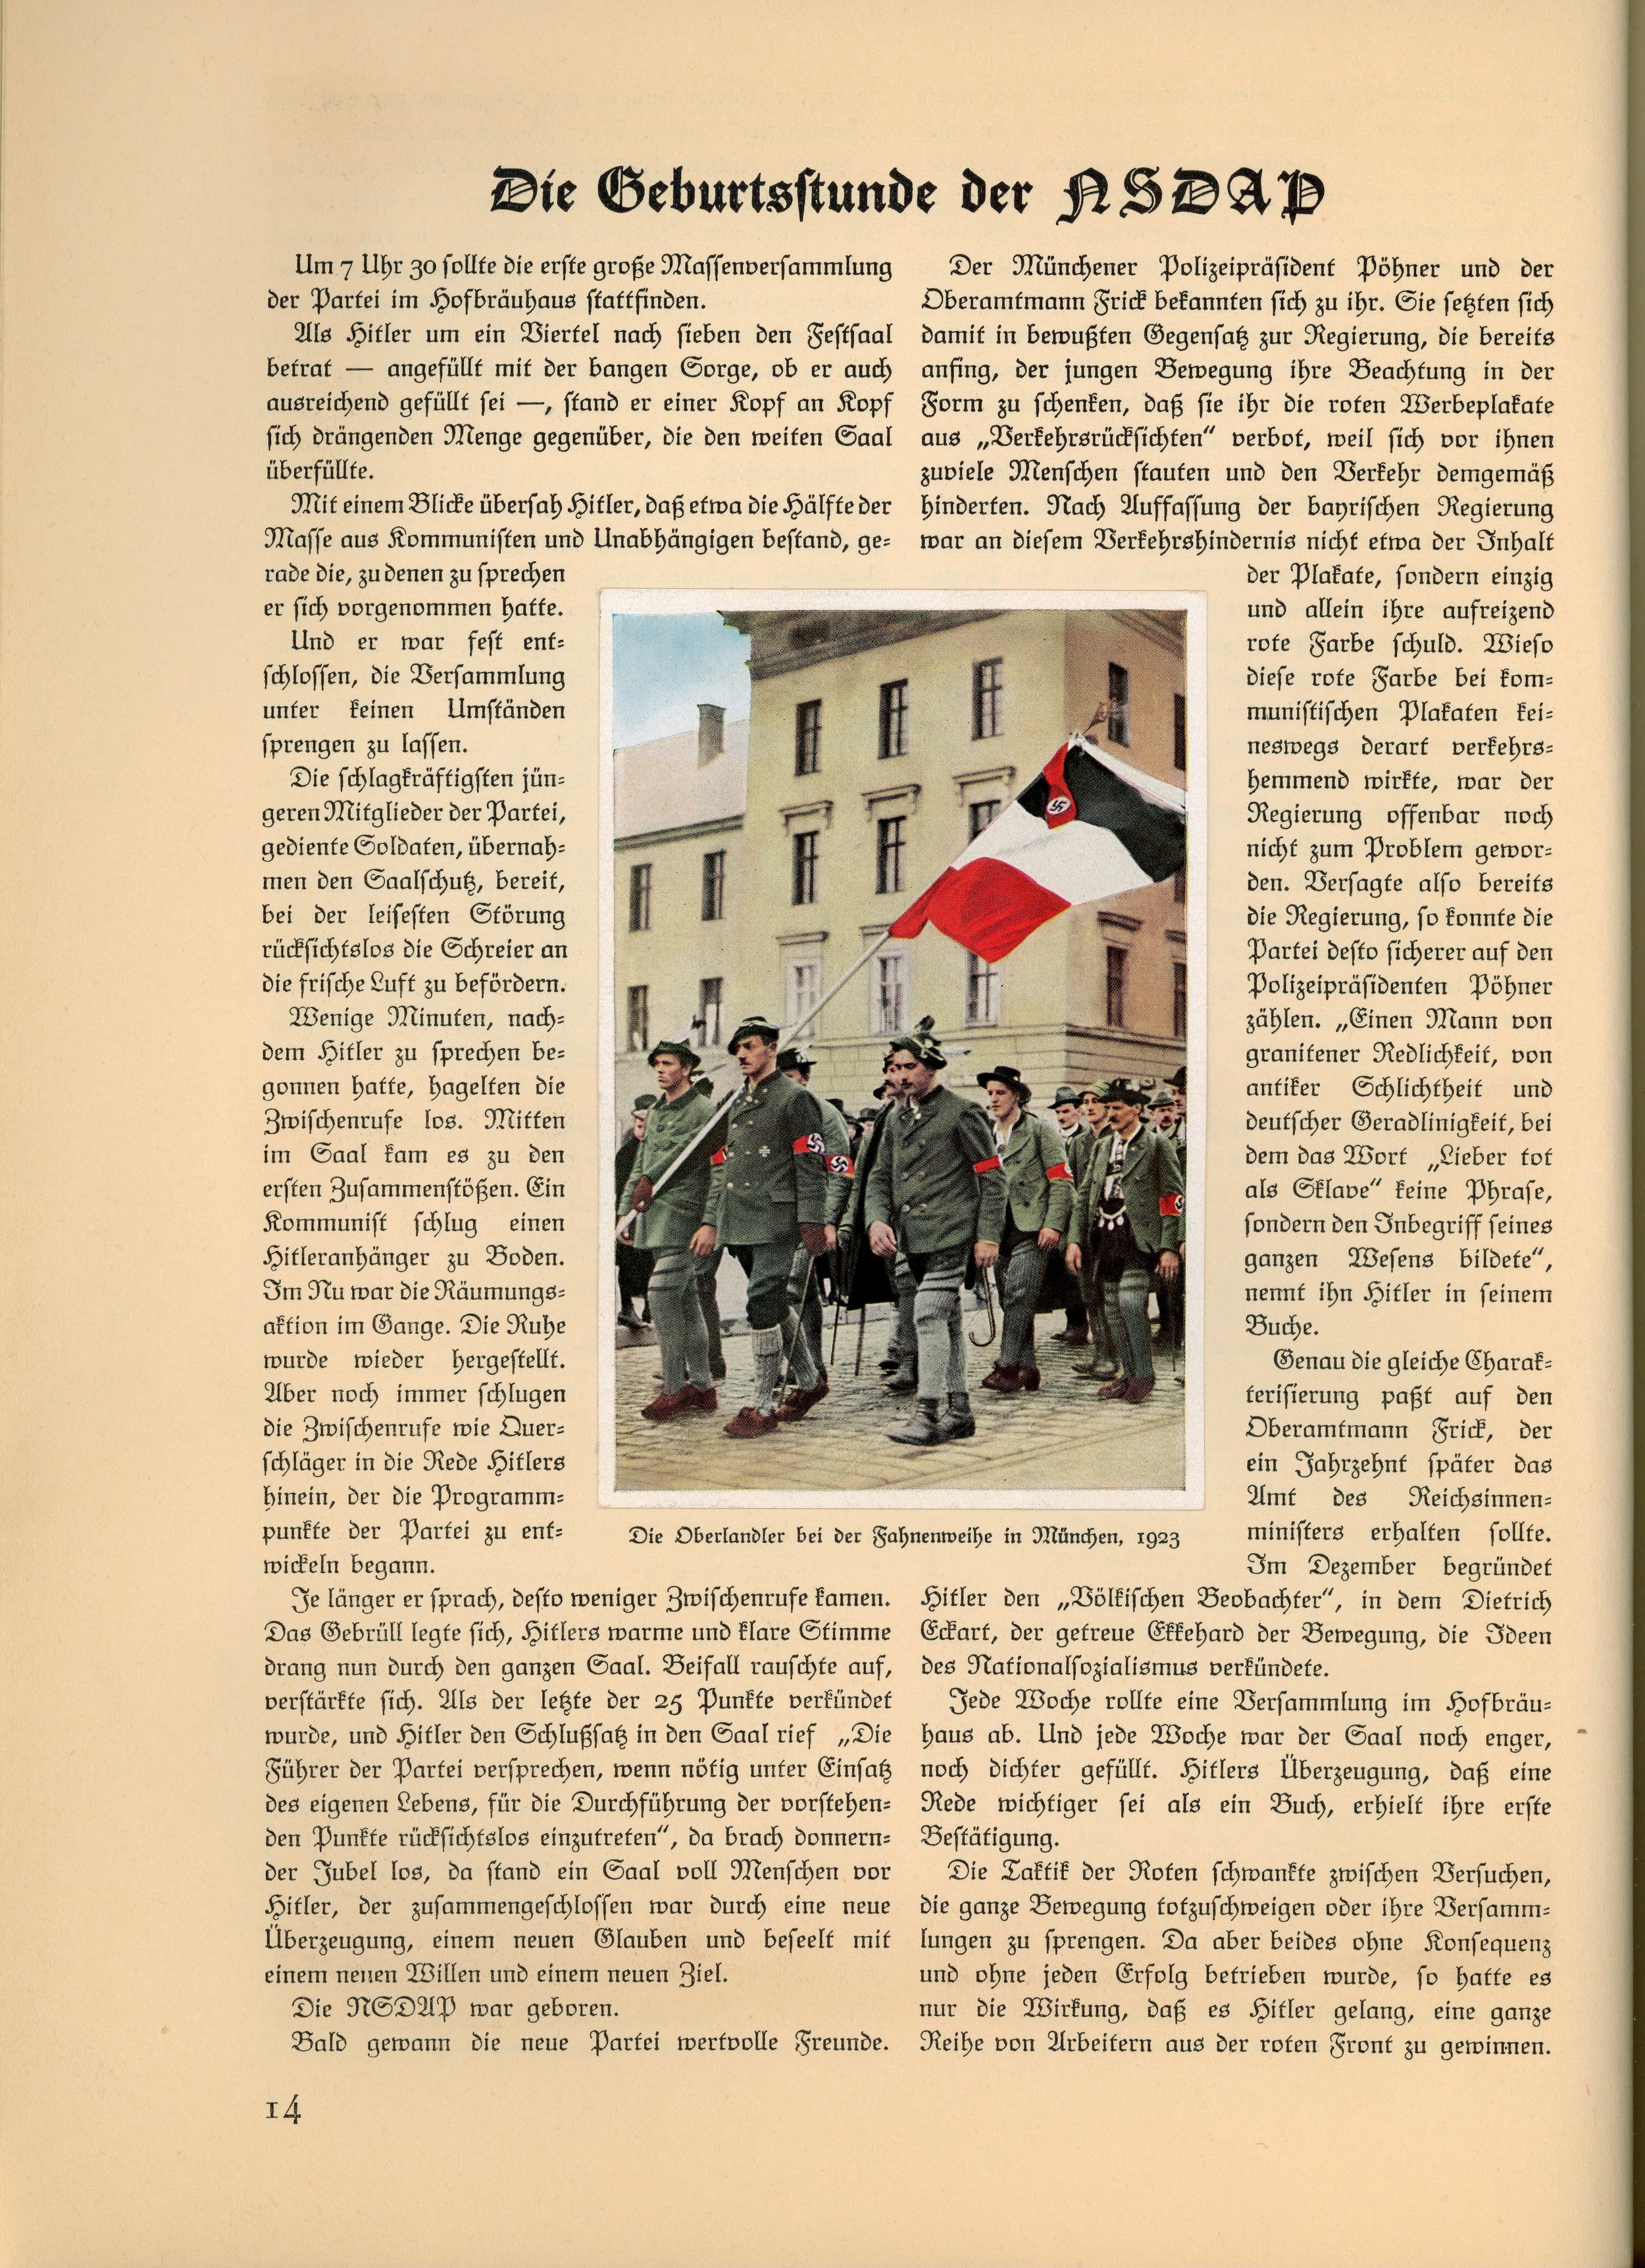 The birth hour of NSDAP